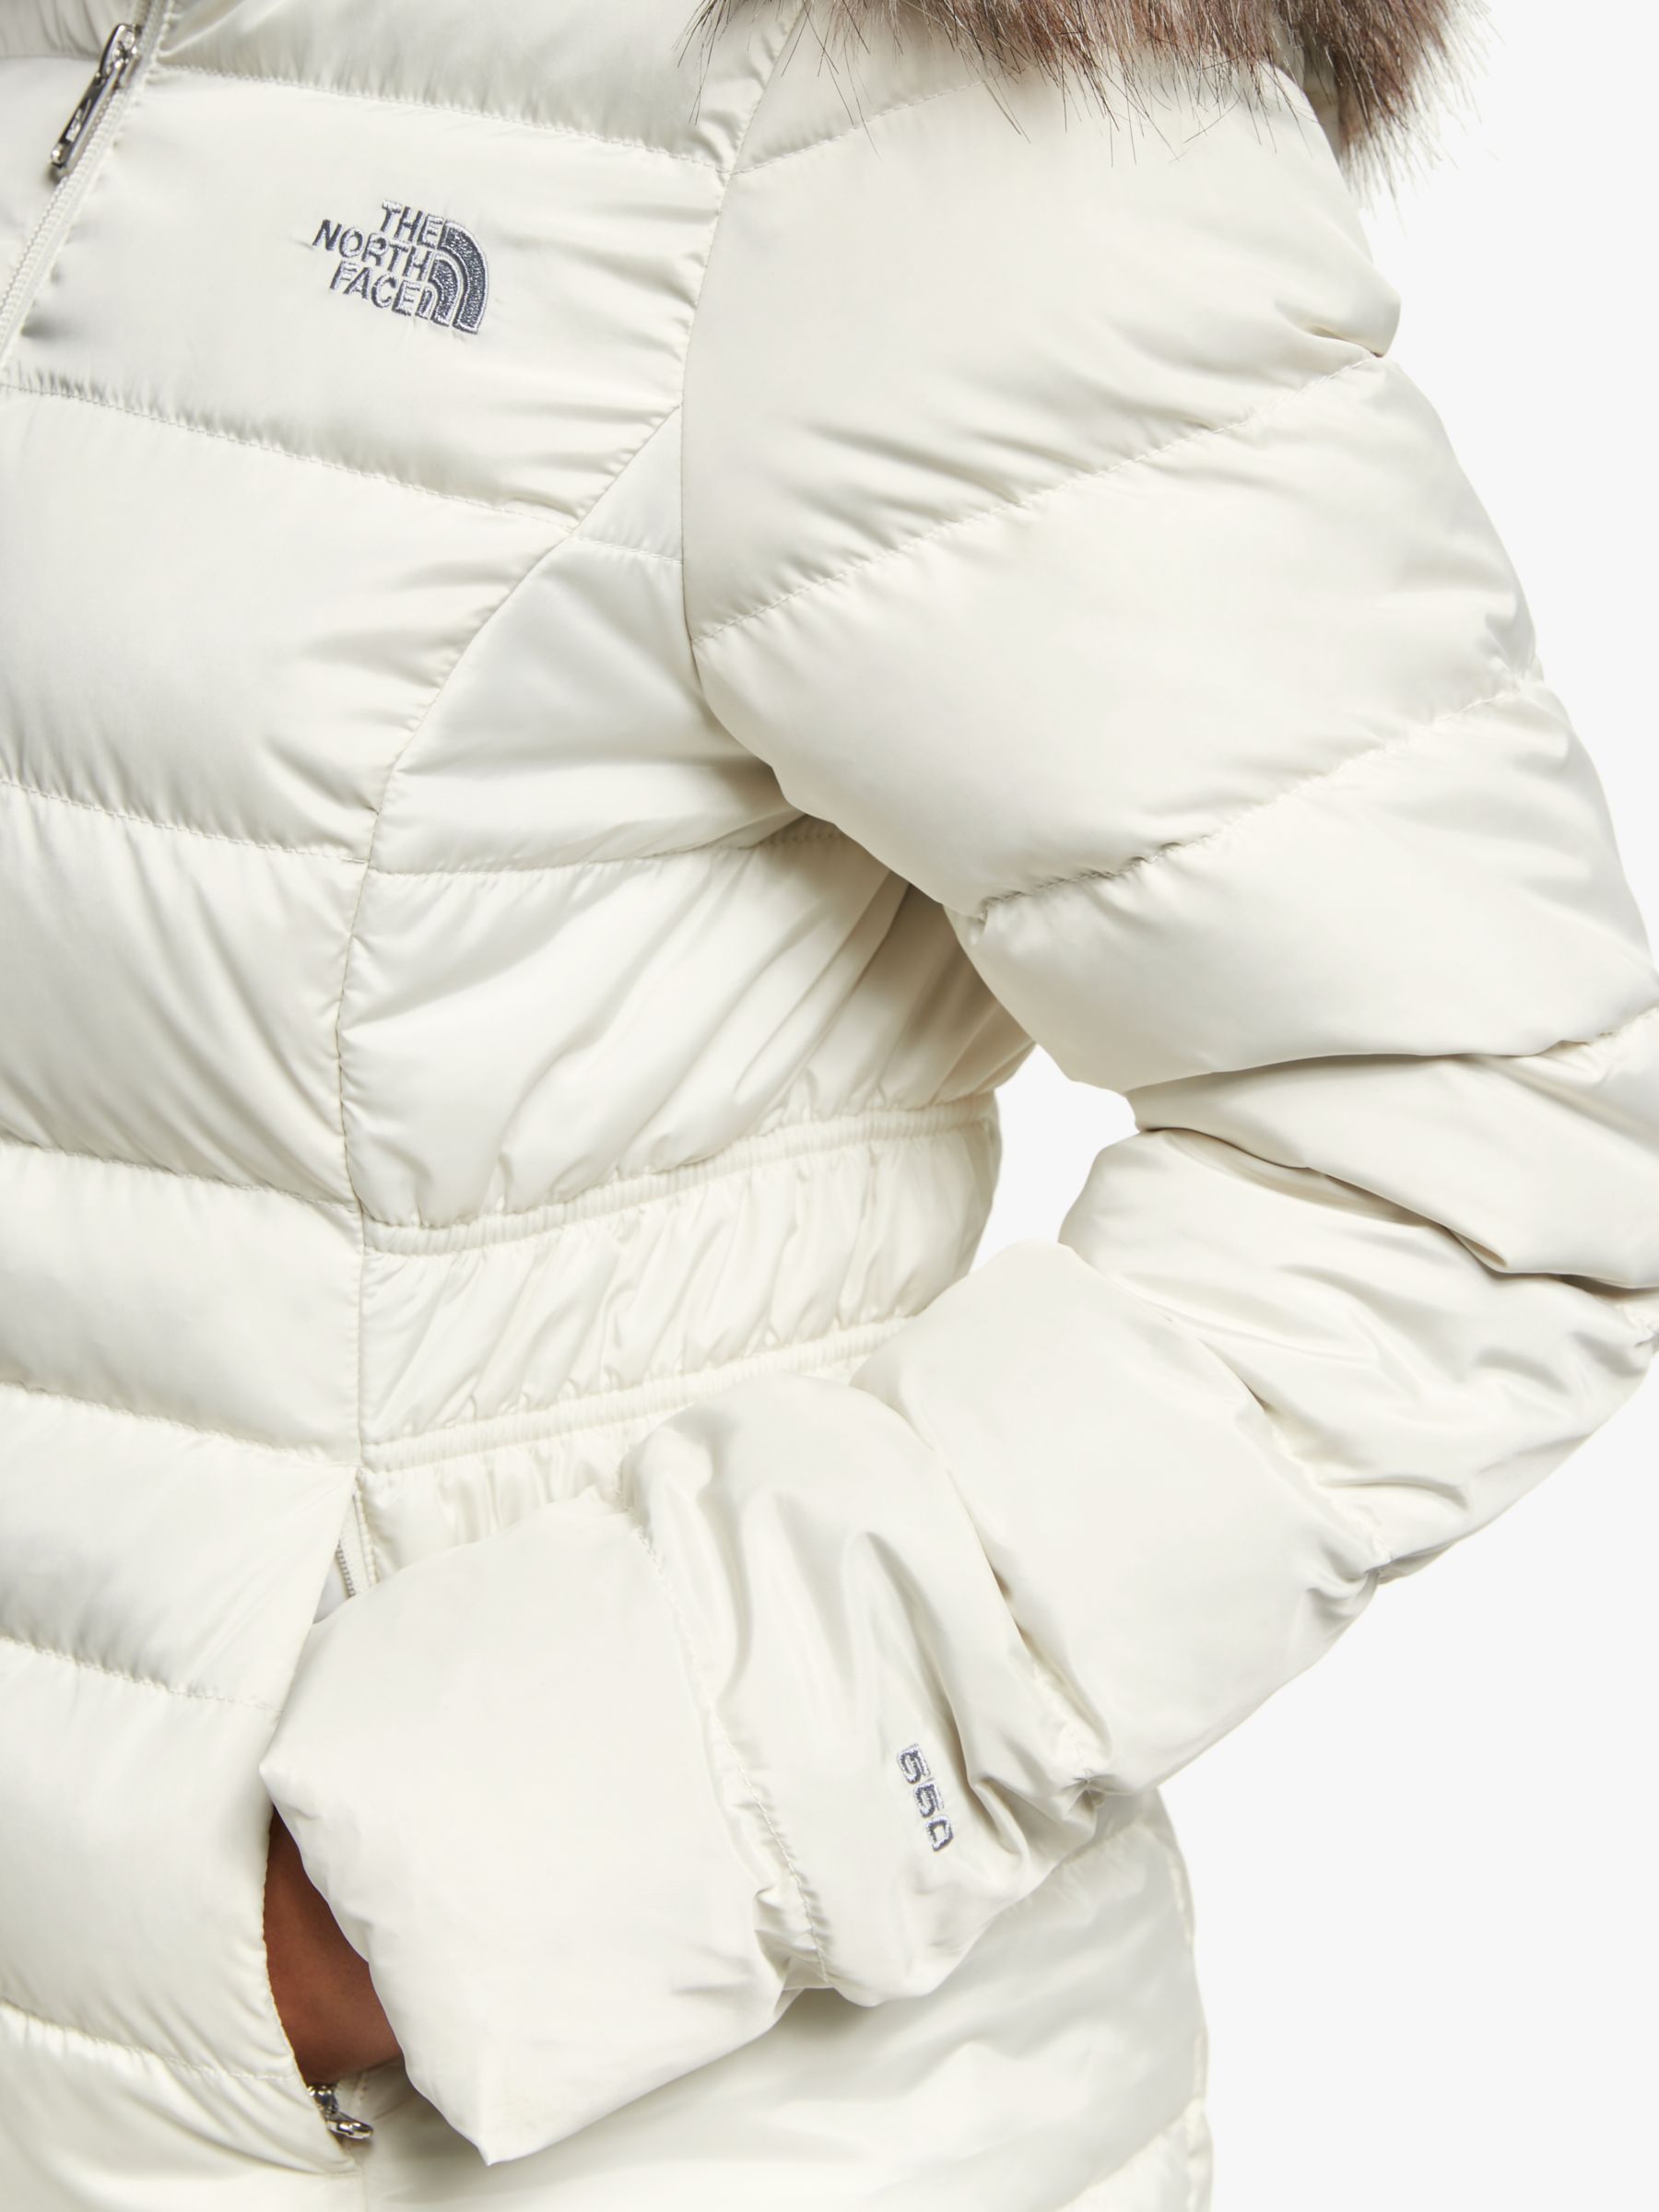 north face women's white jacket